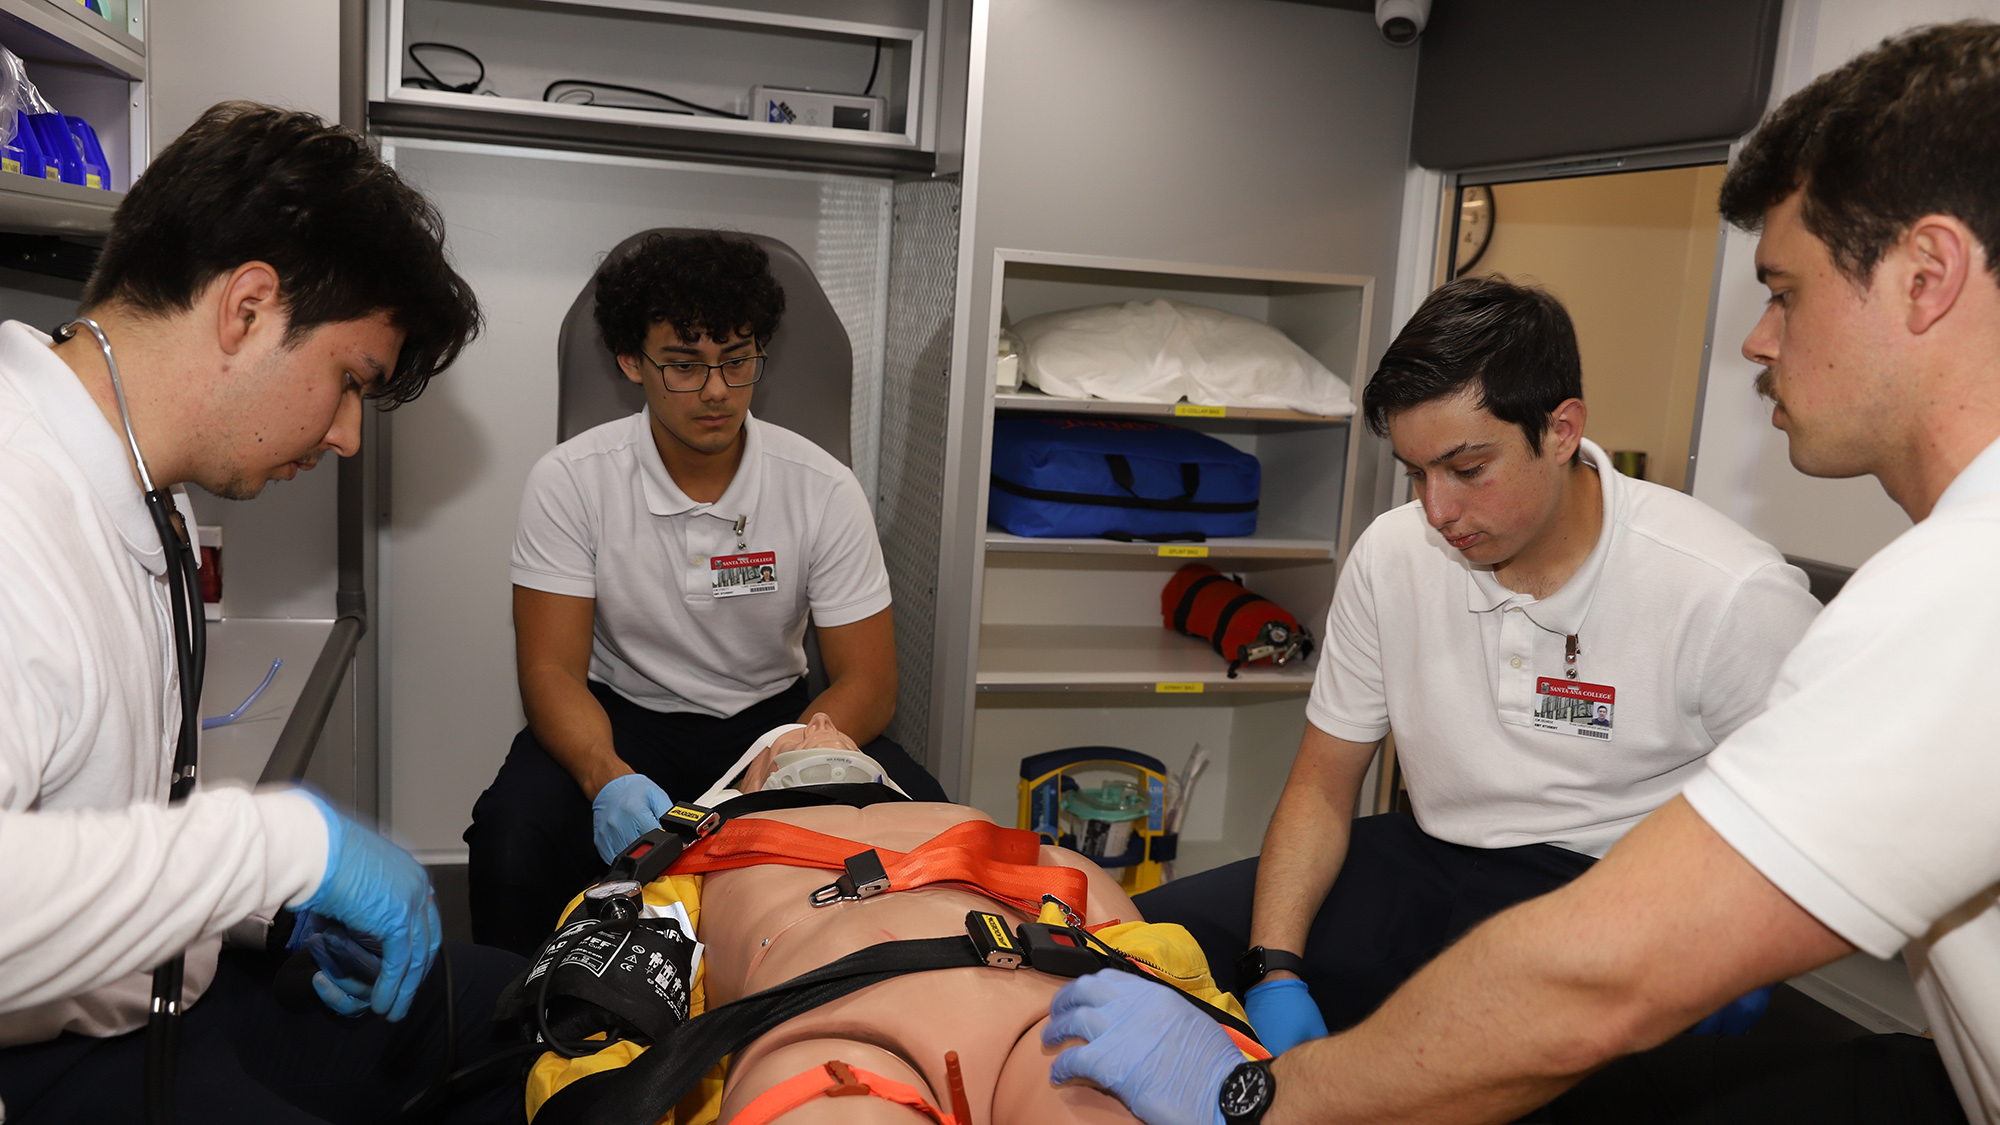 Four EMT students practicing on a model